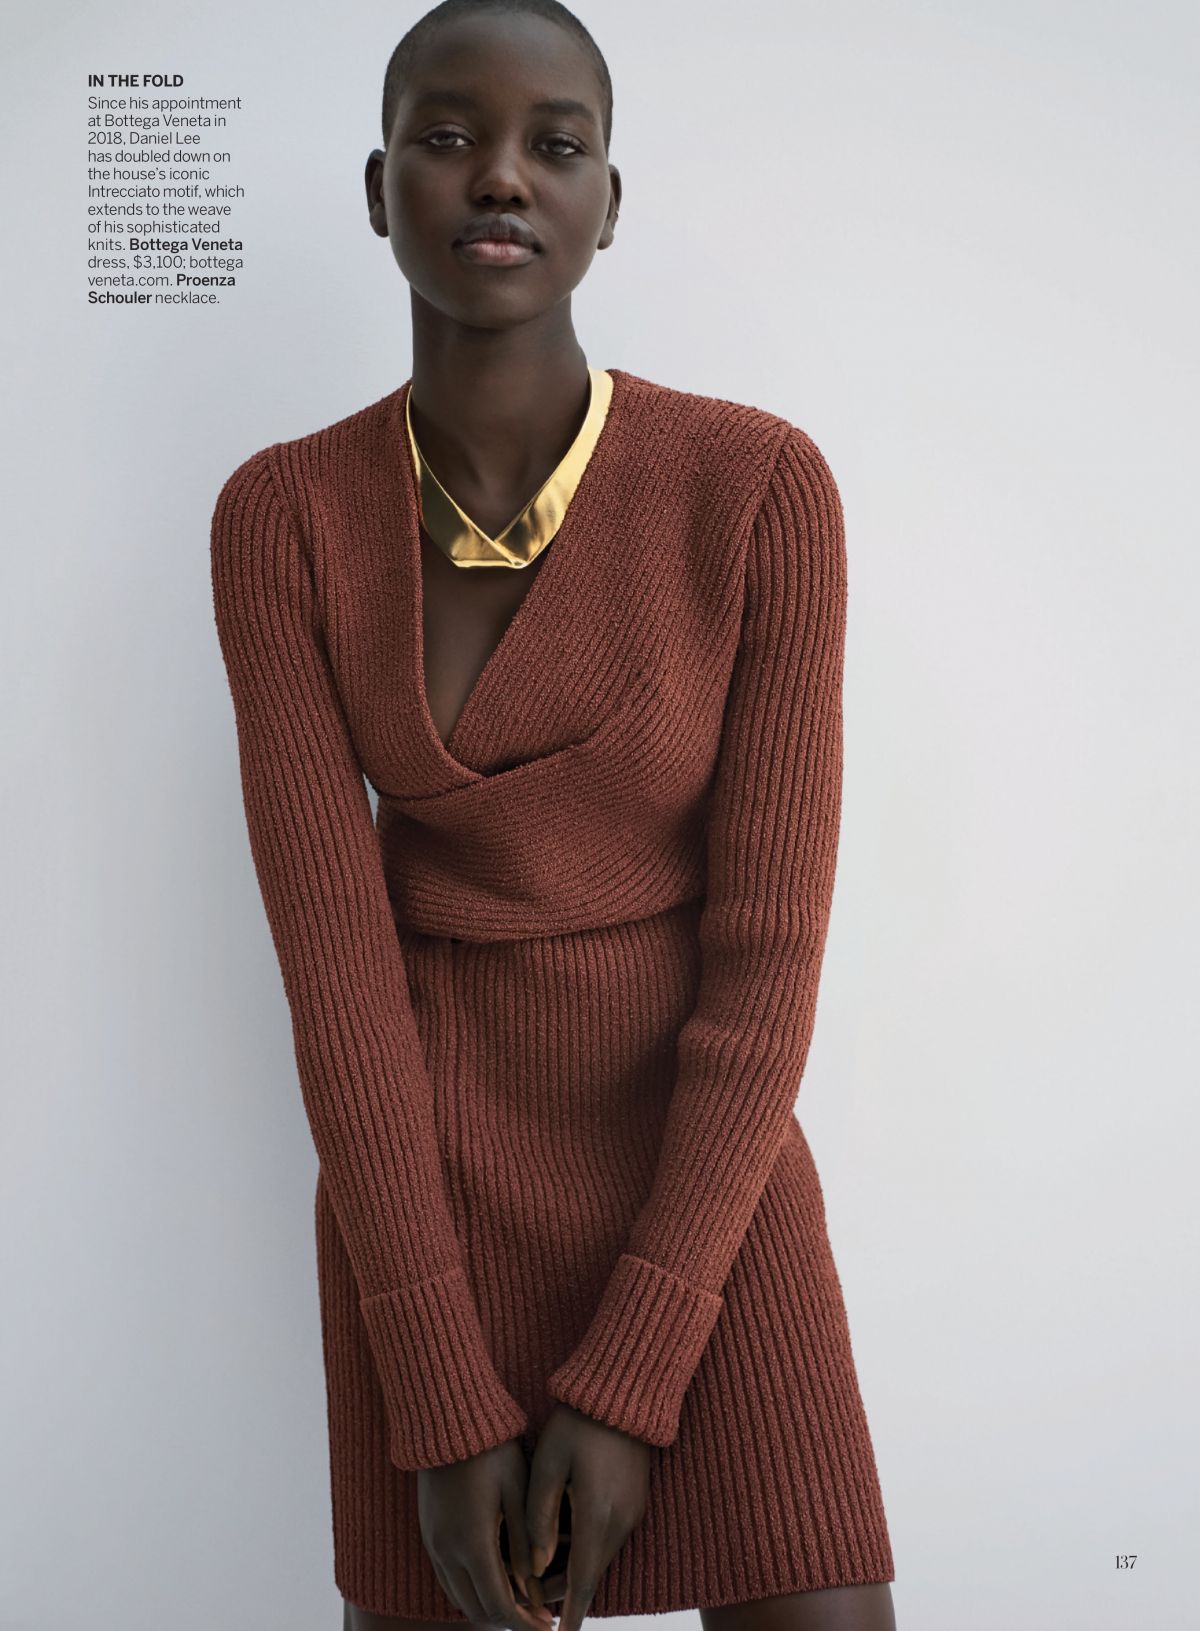 ADUT AKECH and KAIA GERBER in Vogue Magazine, February 2020 – HawtCelebs